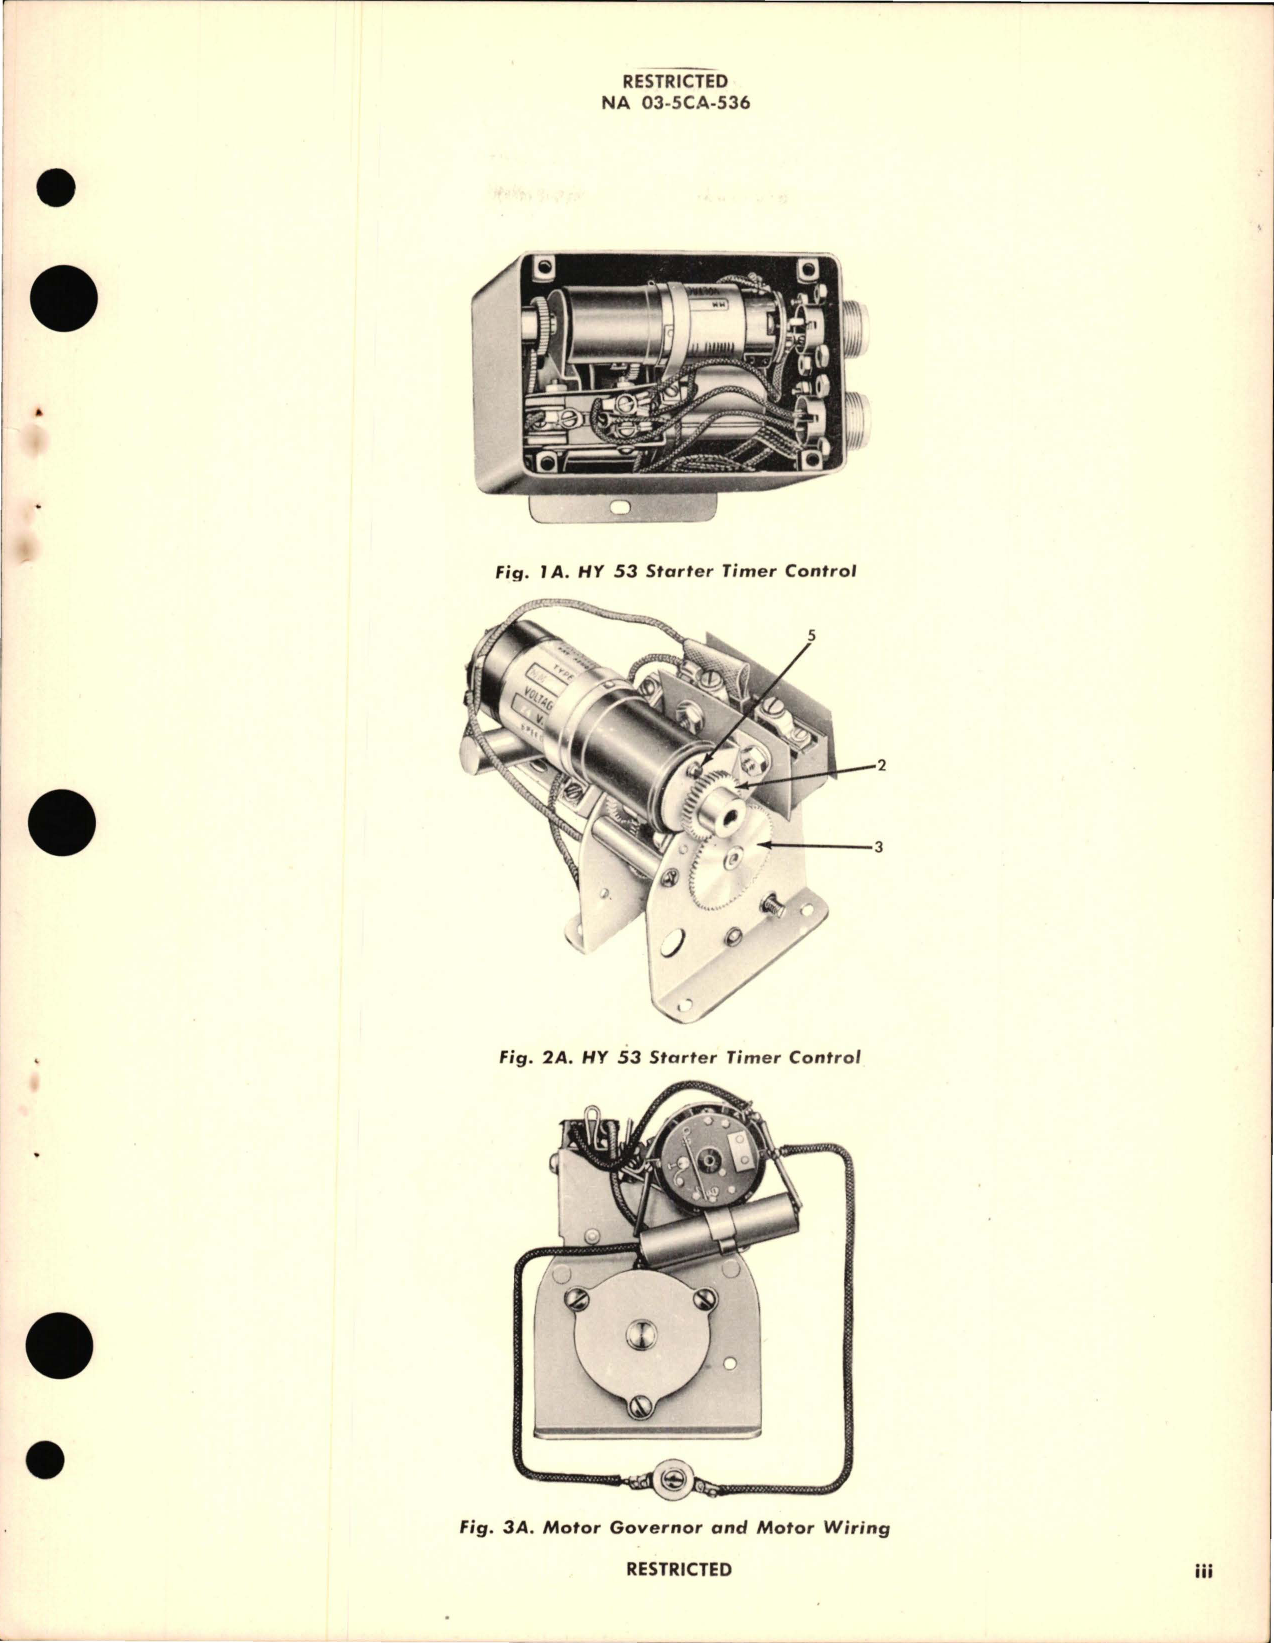 Sample page 5 from AirCorps Library document: Operation, Service and Overhaul Instructions with Parts for Starter Timer Control Model HY-51